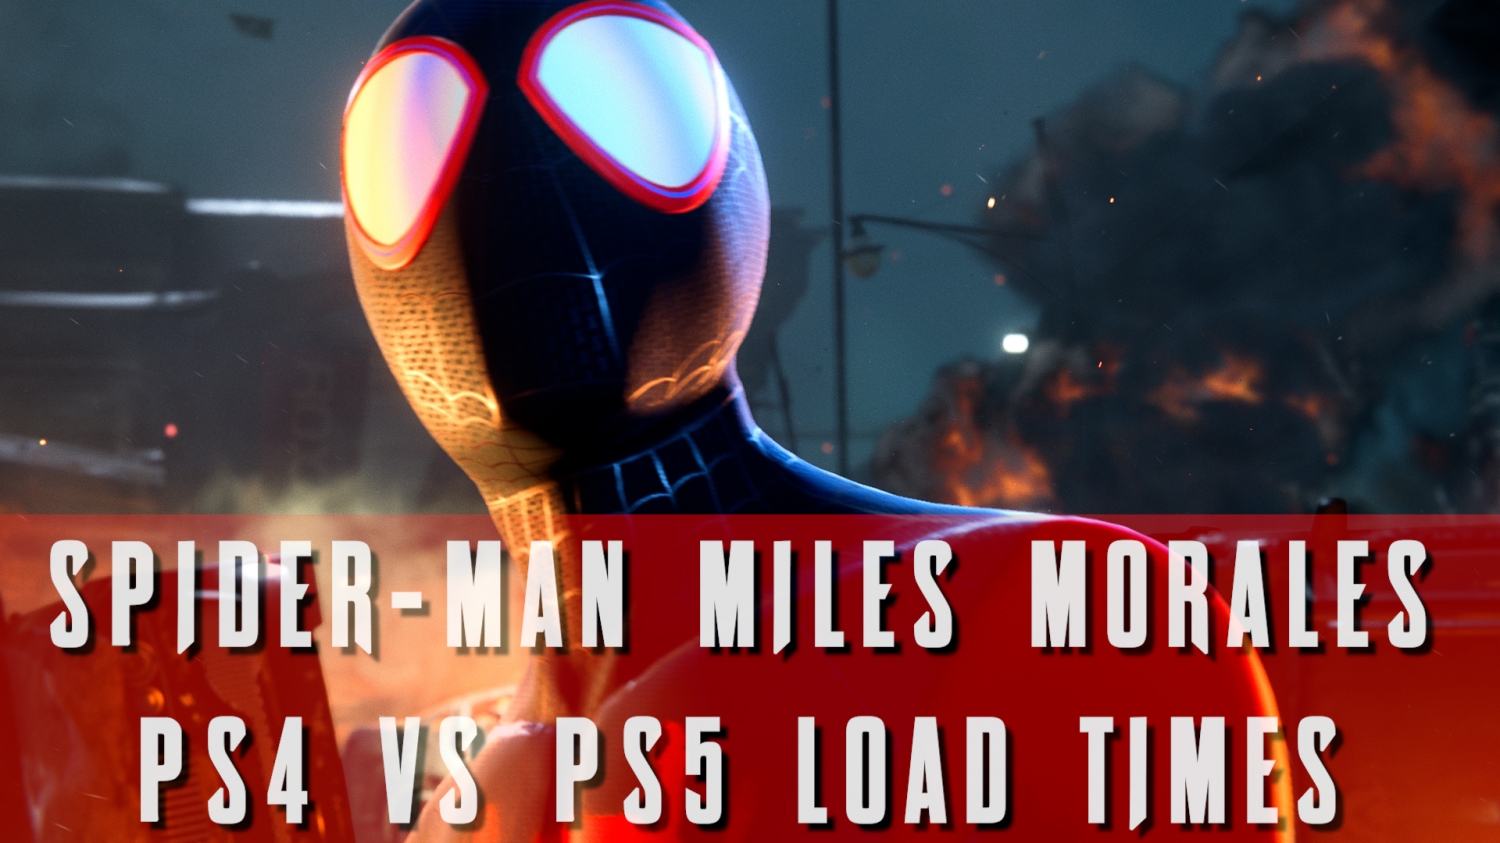 Spider-Man Miles Morales loads in less than 10 seconds on PS5